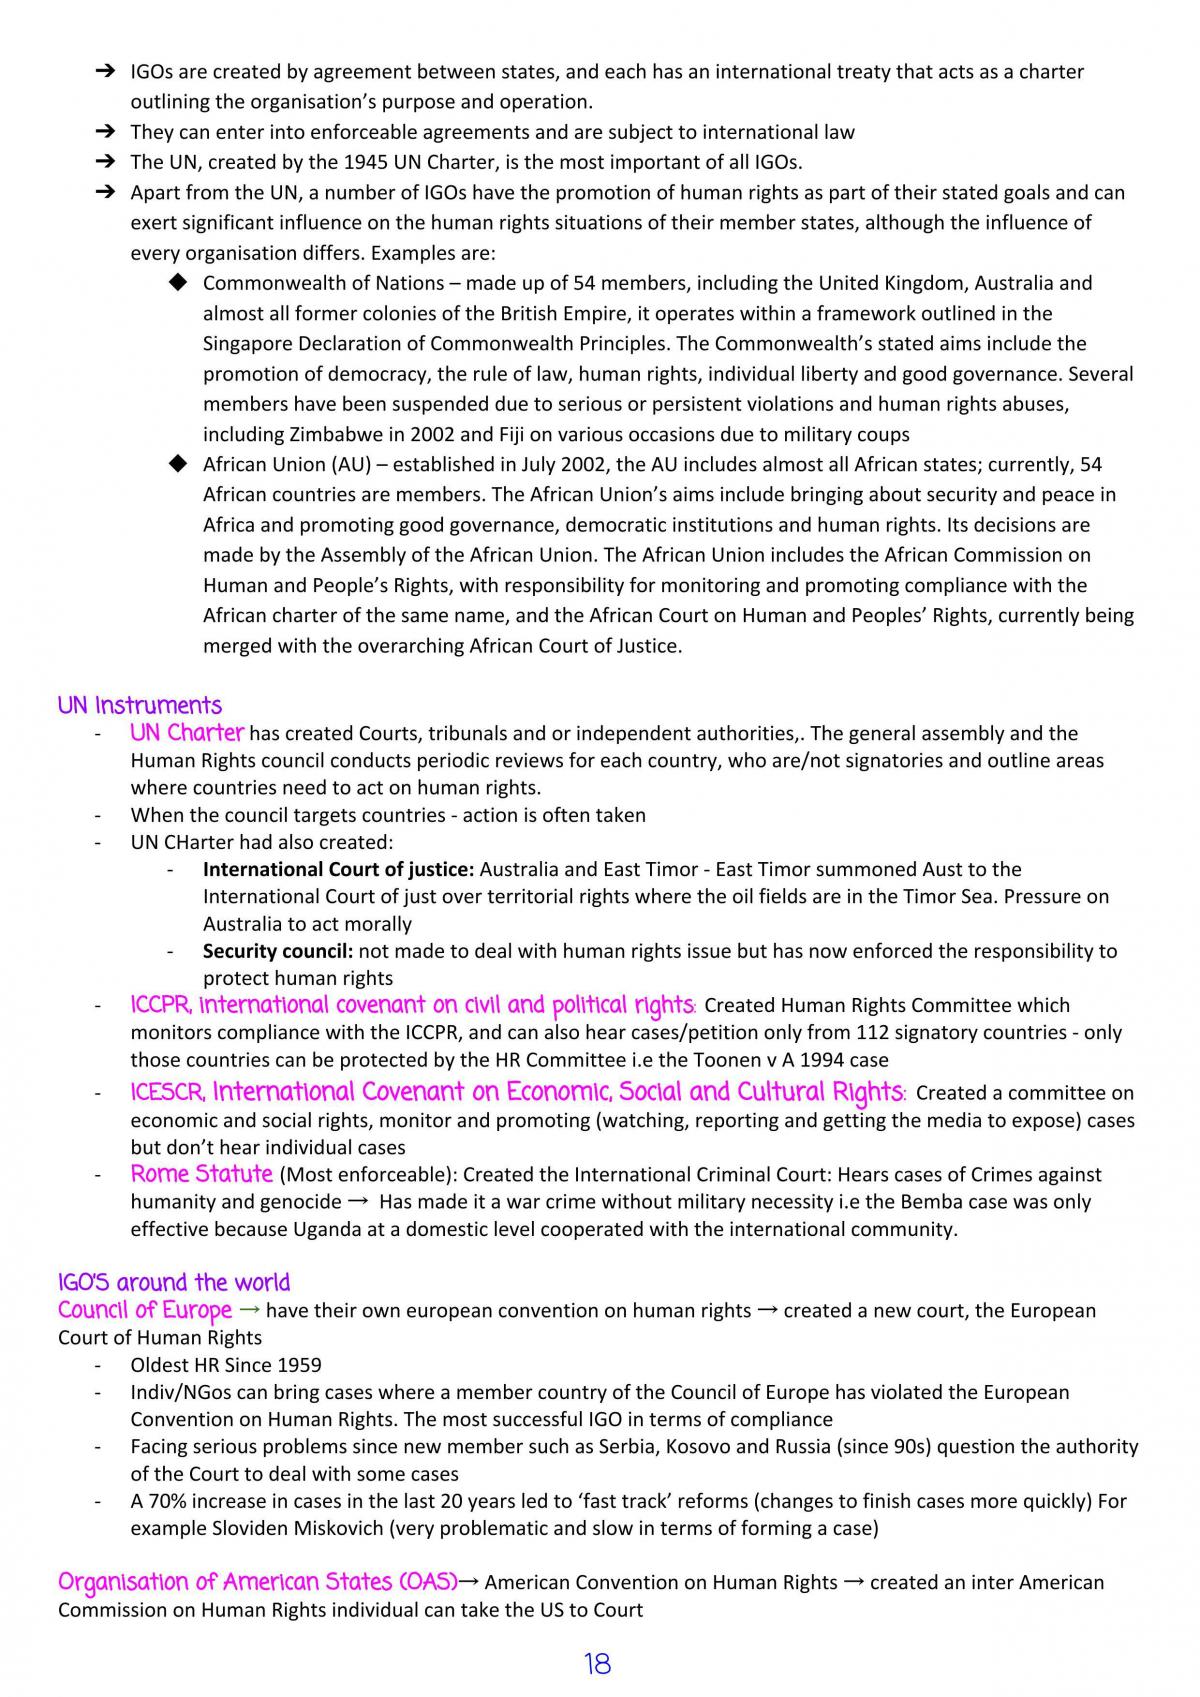 Human Rights Notes - Page 18